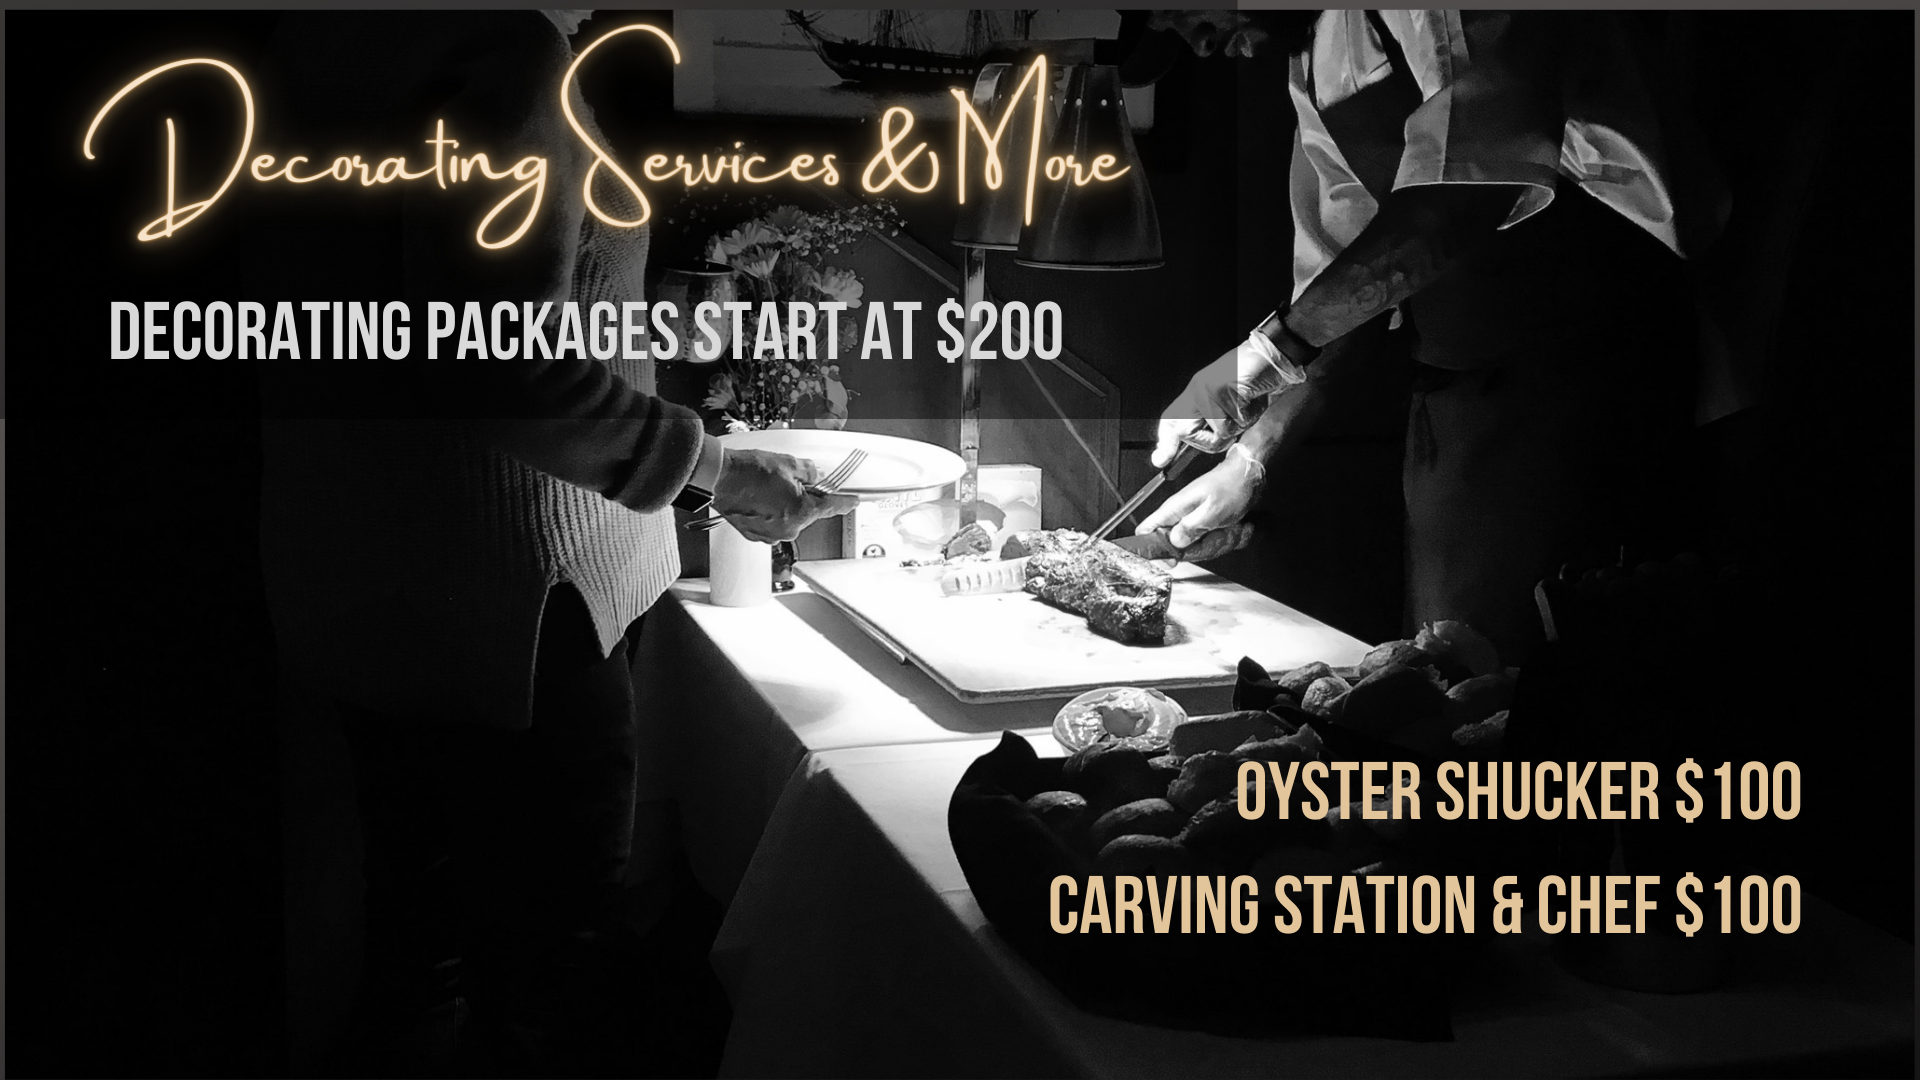 Decorating Services & More: Decorating packages start at $200. Oyster Shucker $100 carving station & Chef $100
                                